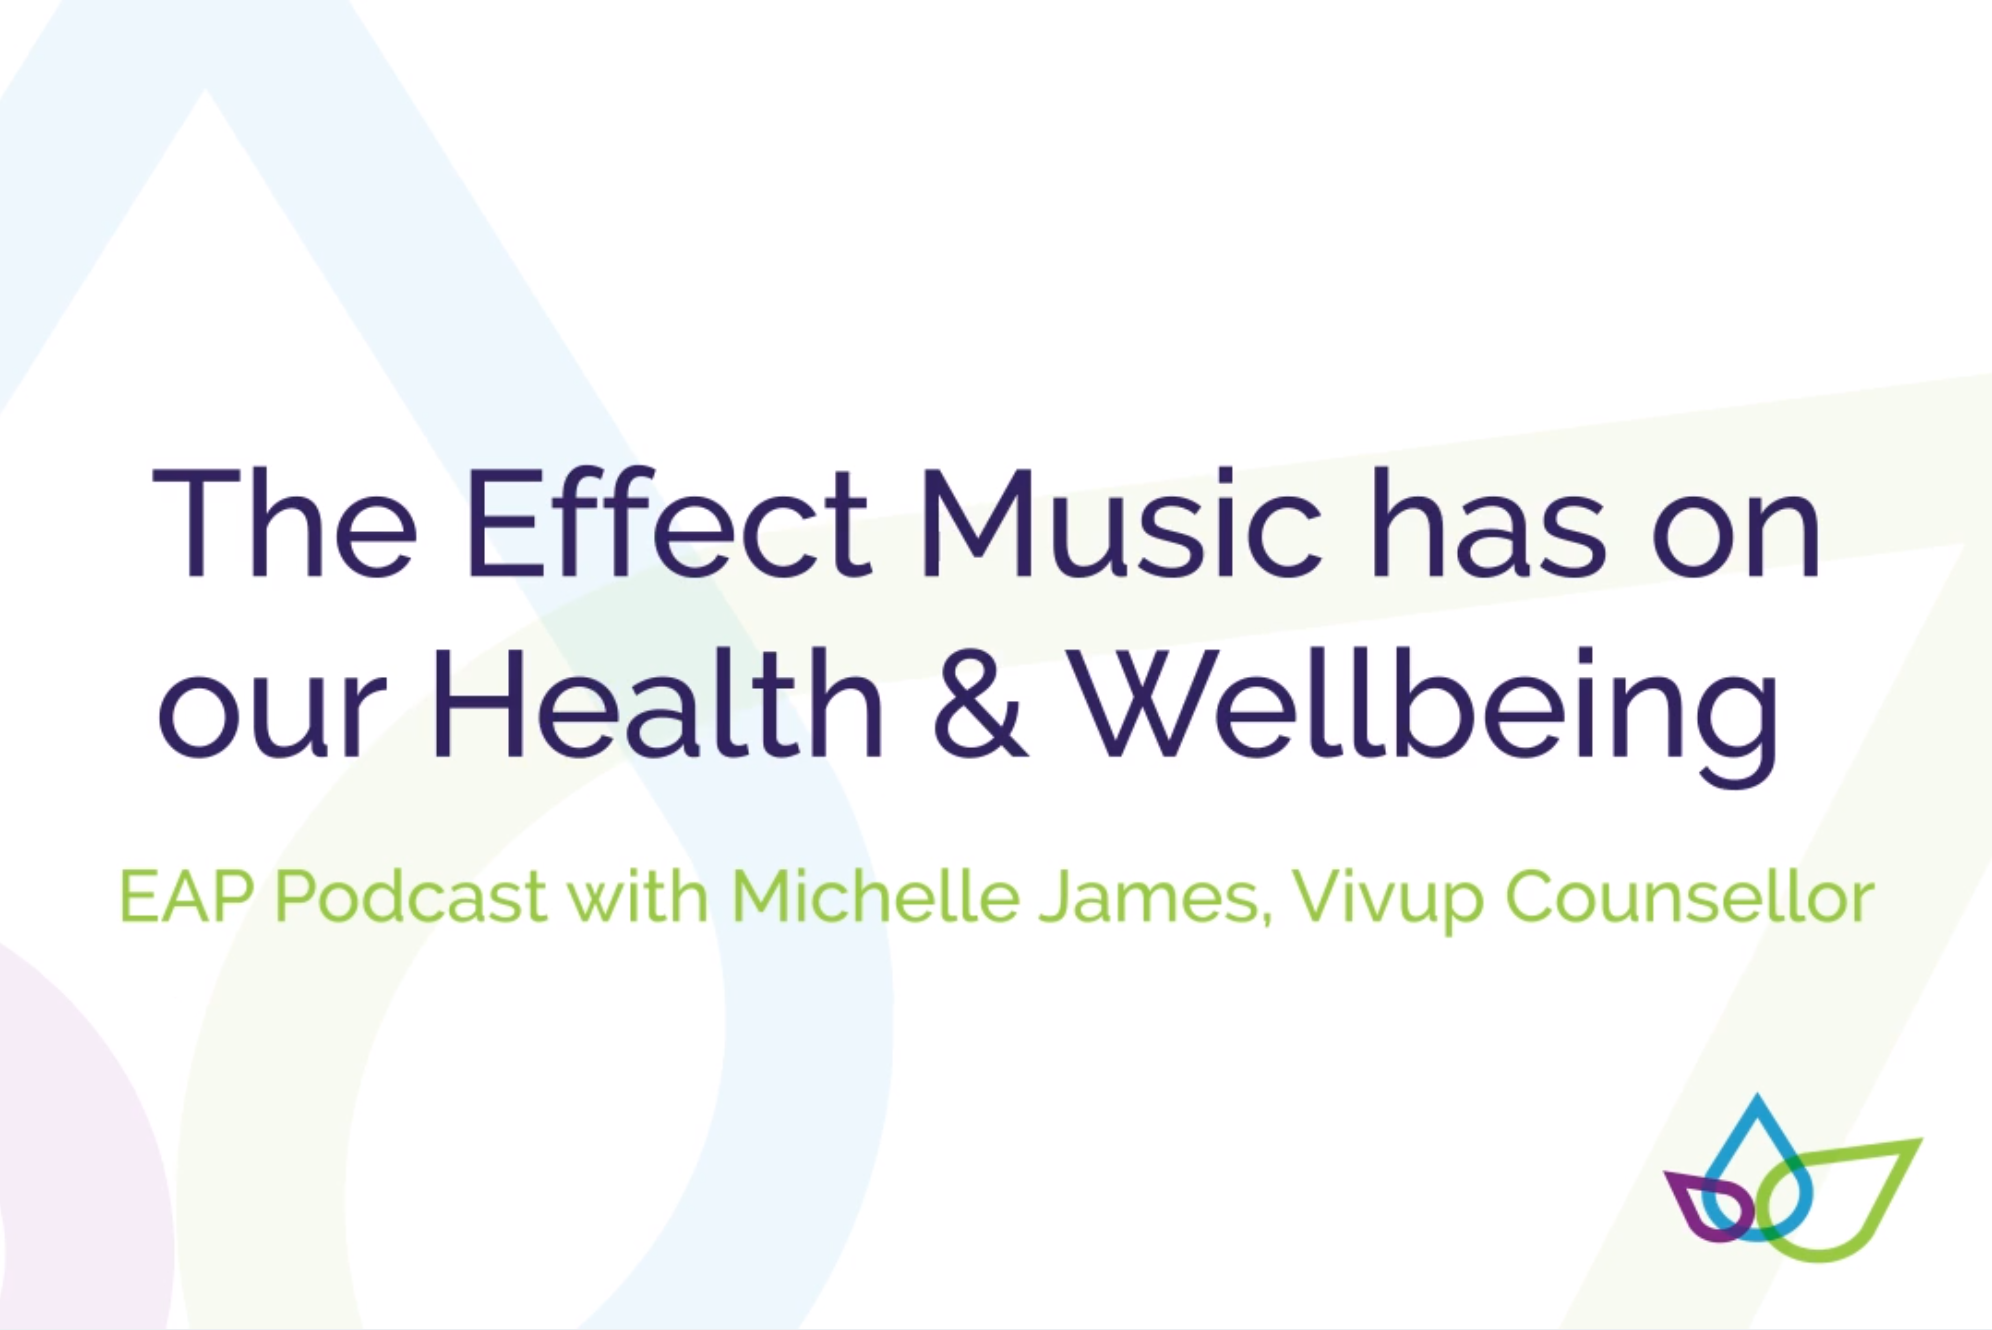 EAP Podcast thumbnail on the effects of music on health and wellbeing